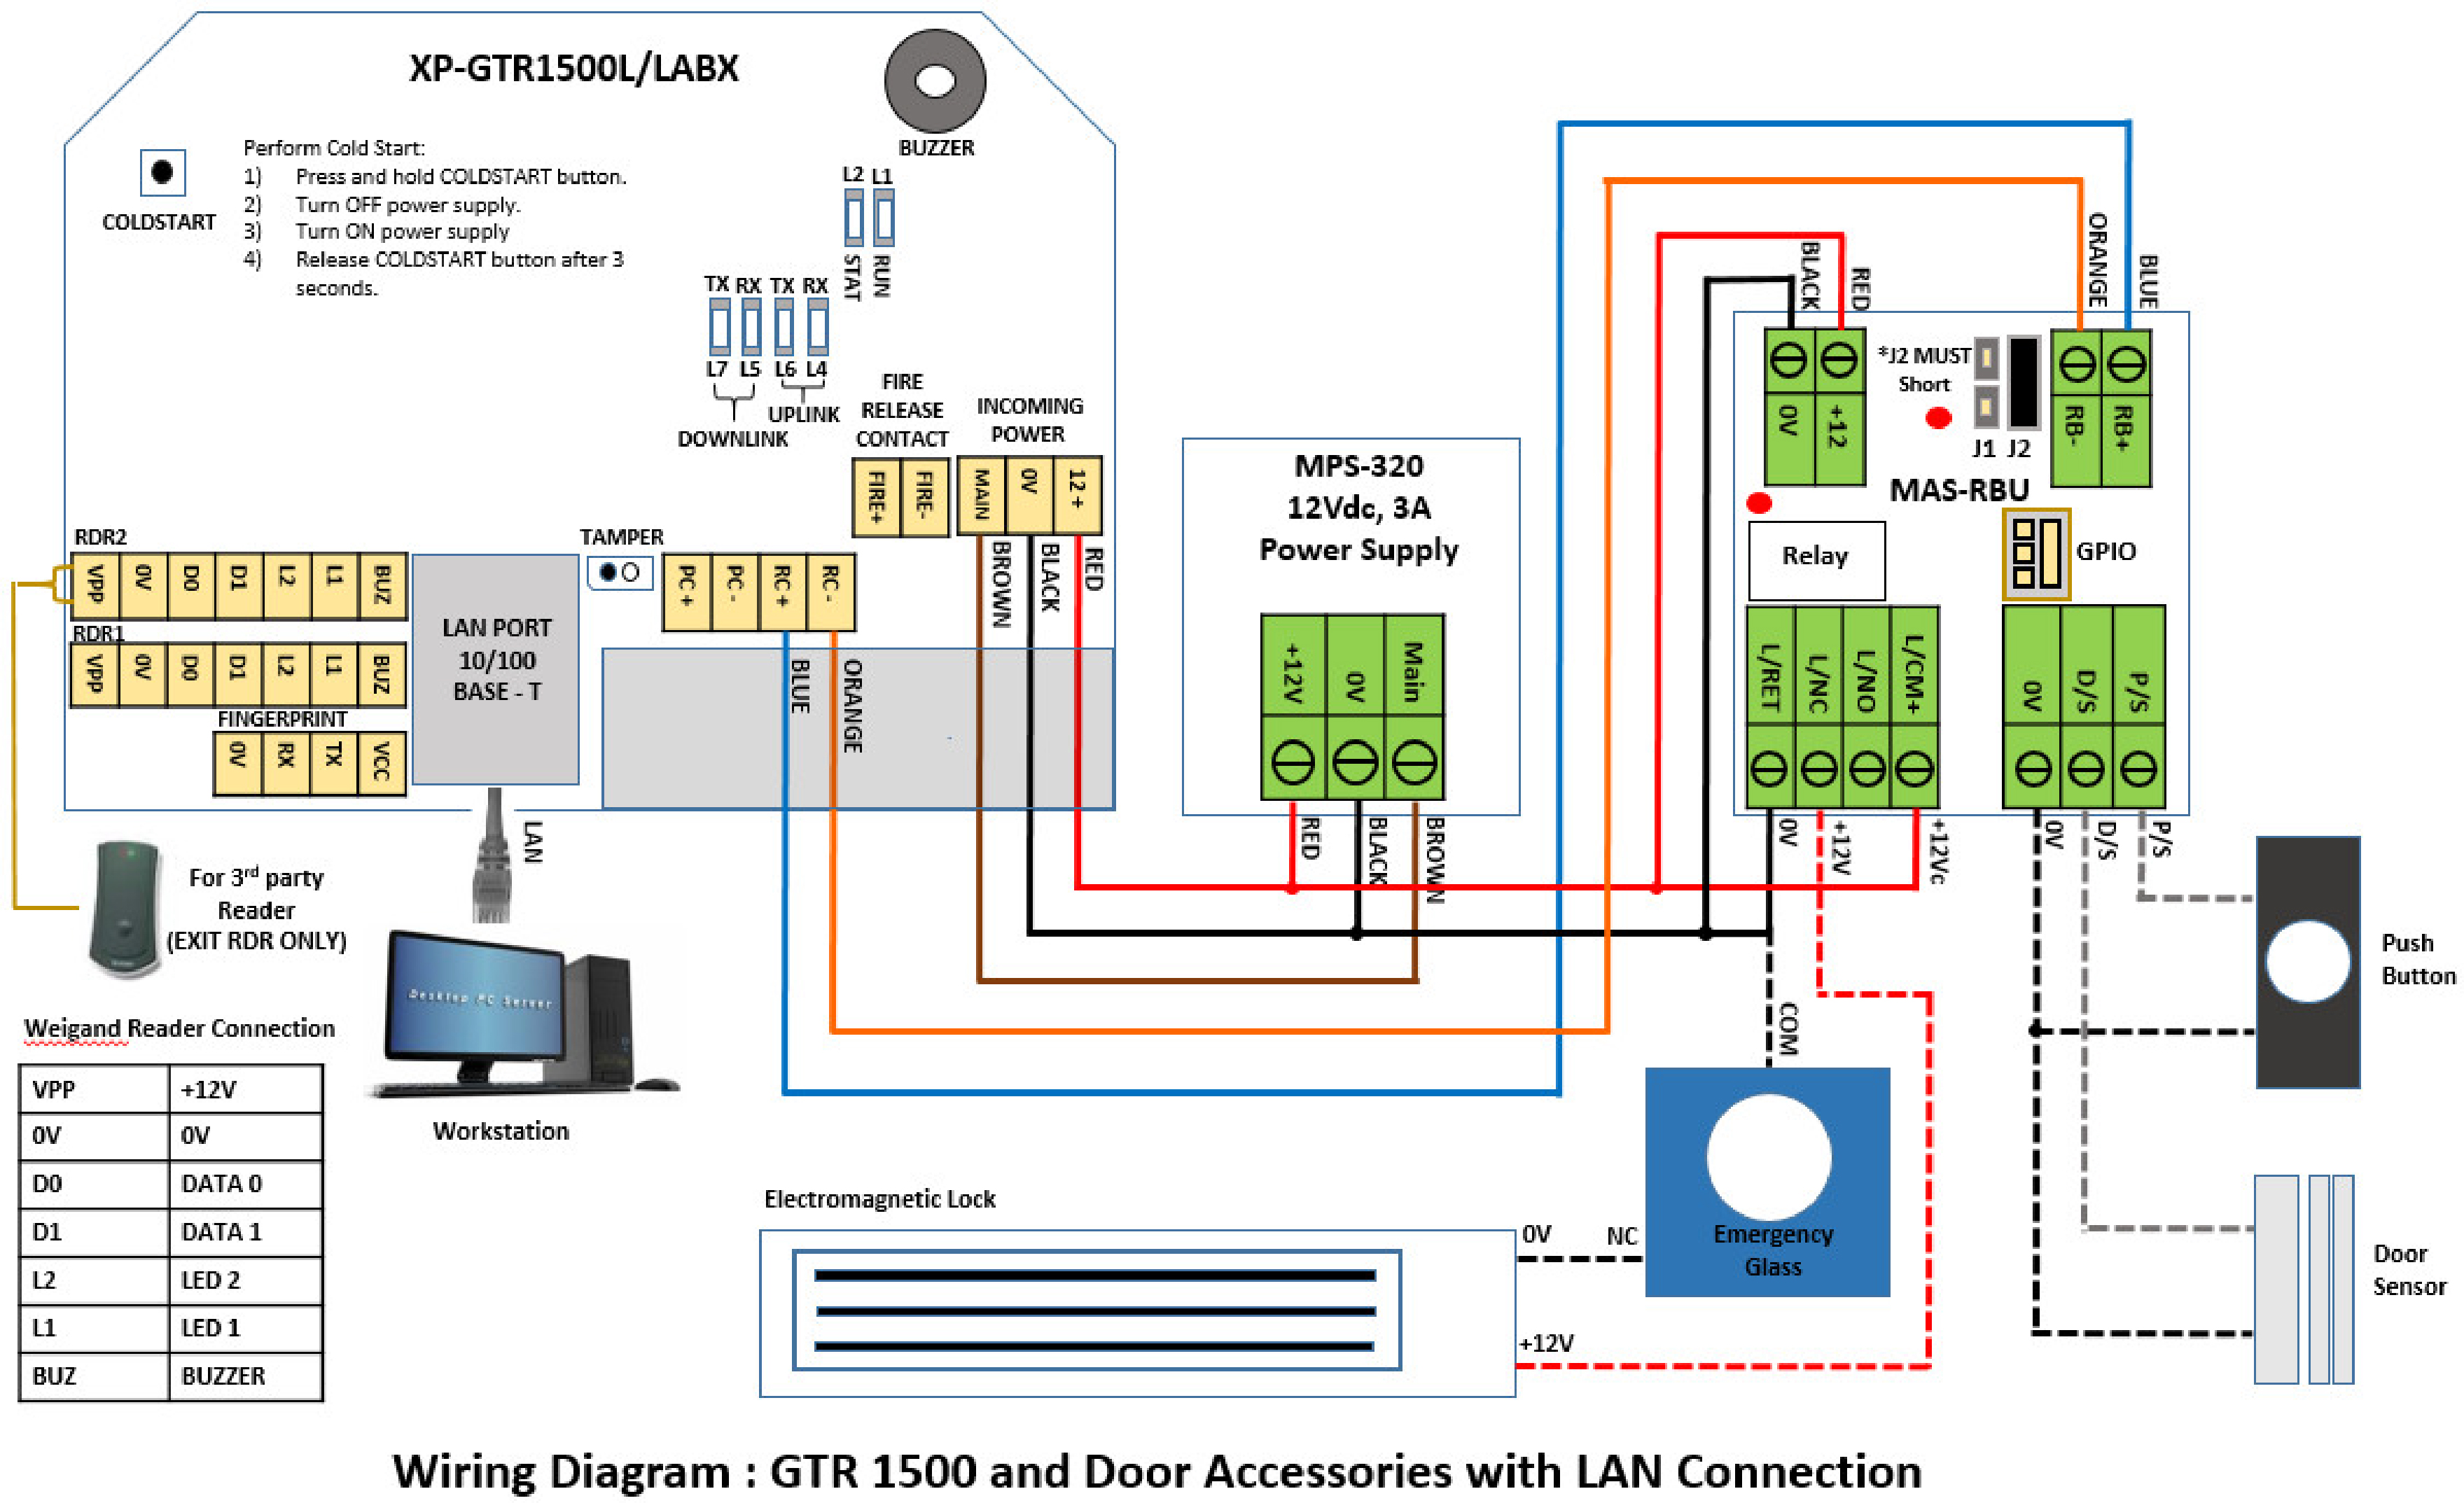 Wiring Diagram for XP-GTR1500 and Door Accessories using LAN Connection